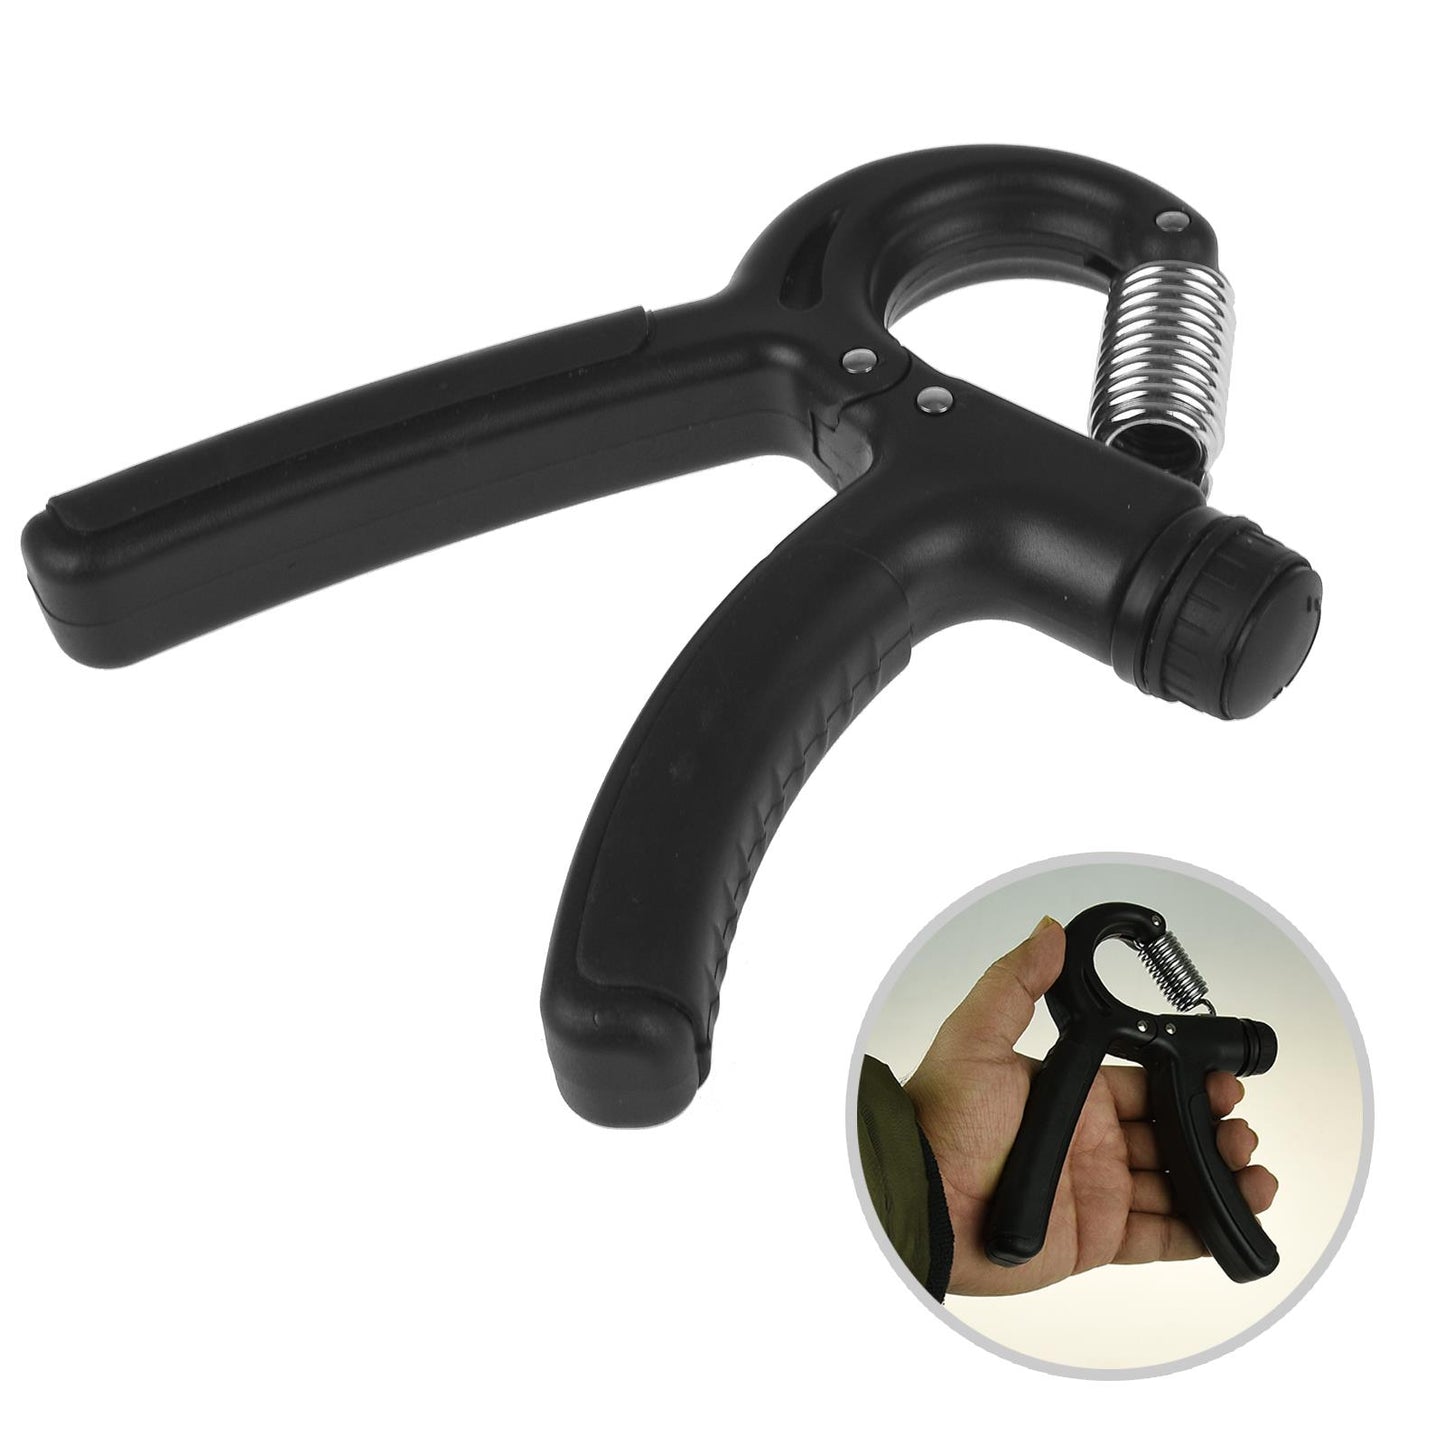 Hand Grip Strengthener Set For Wrist And Forearm Muscle Training